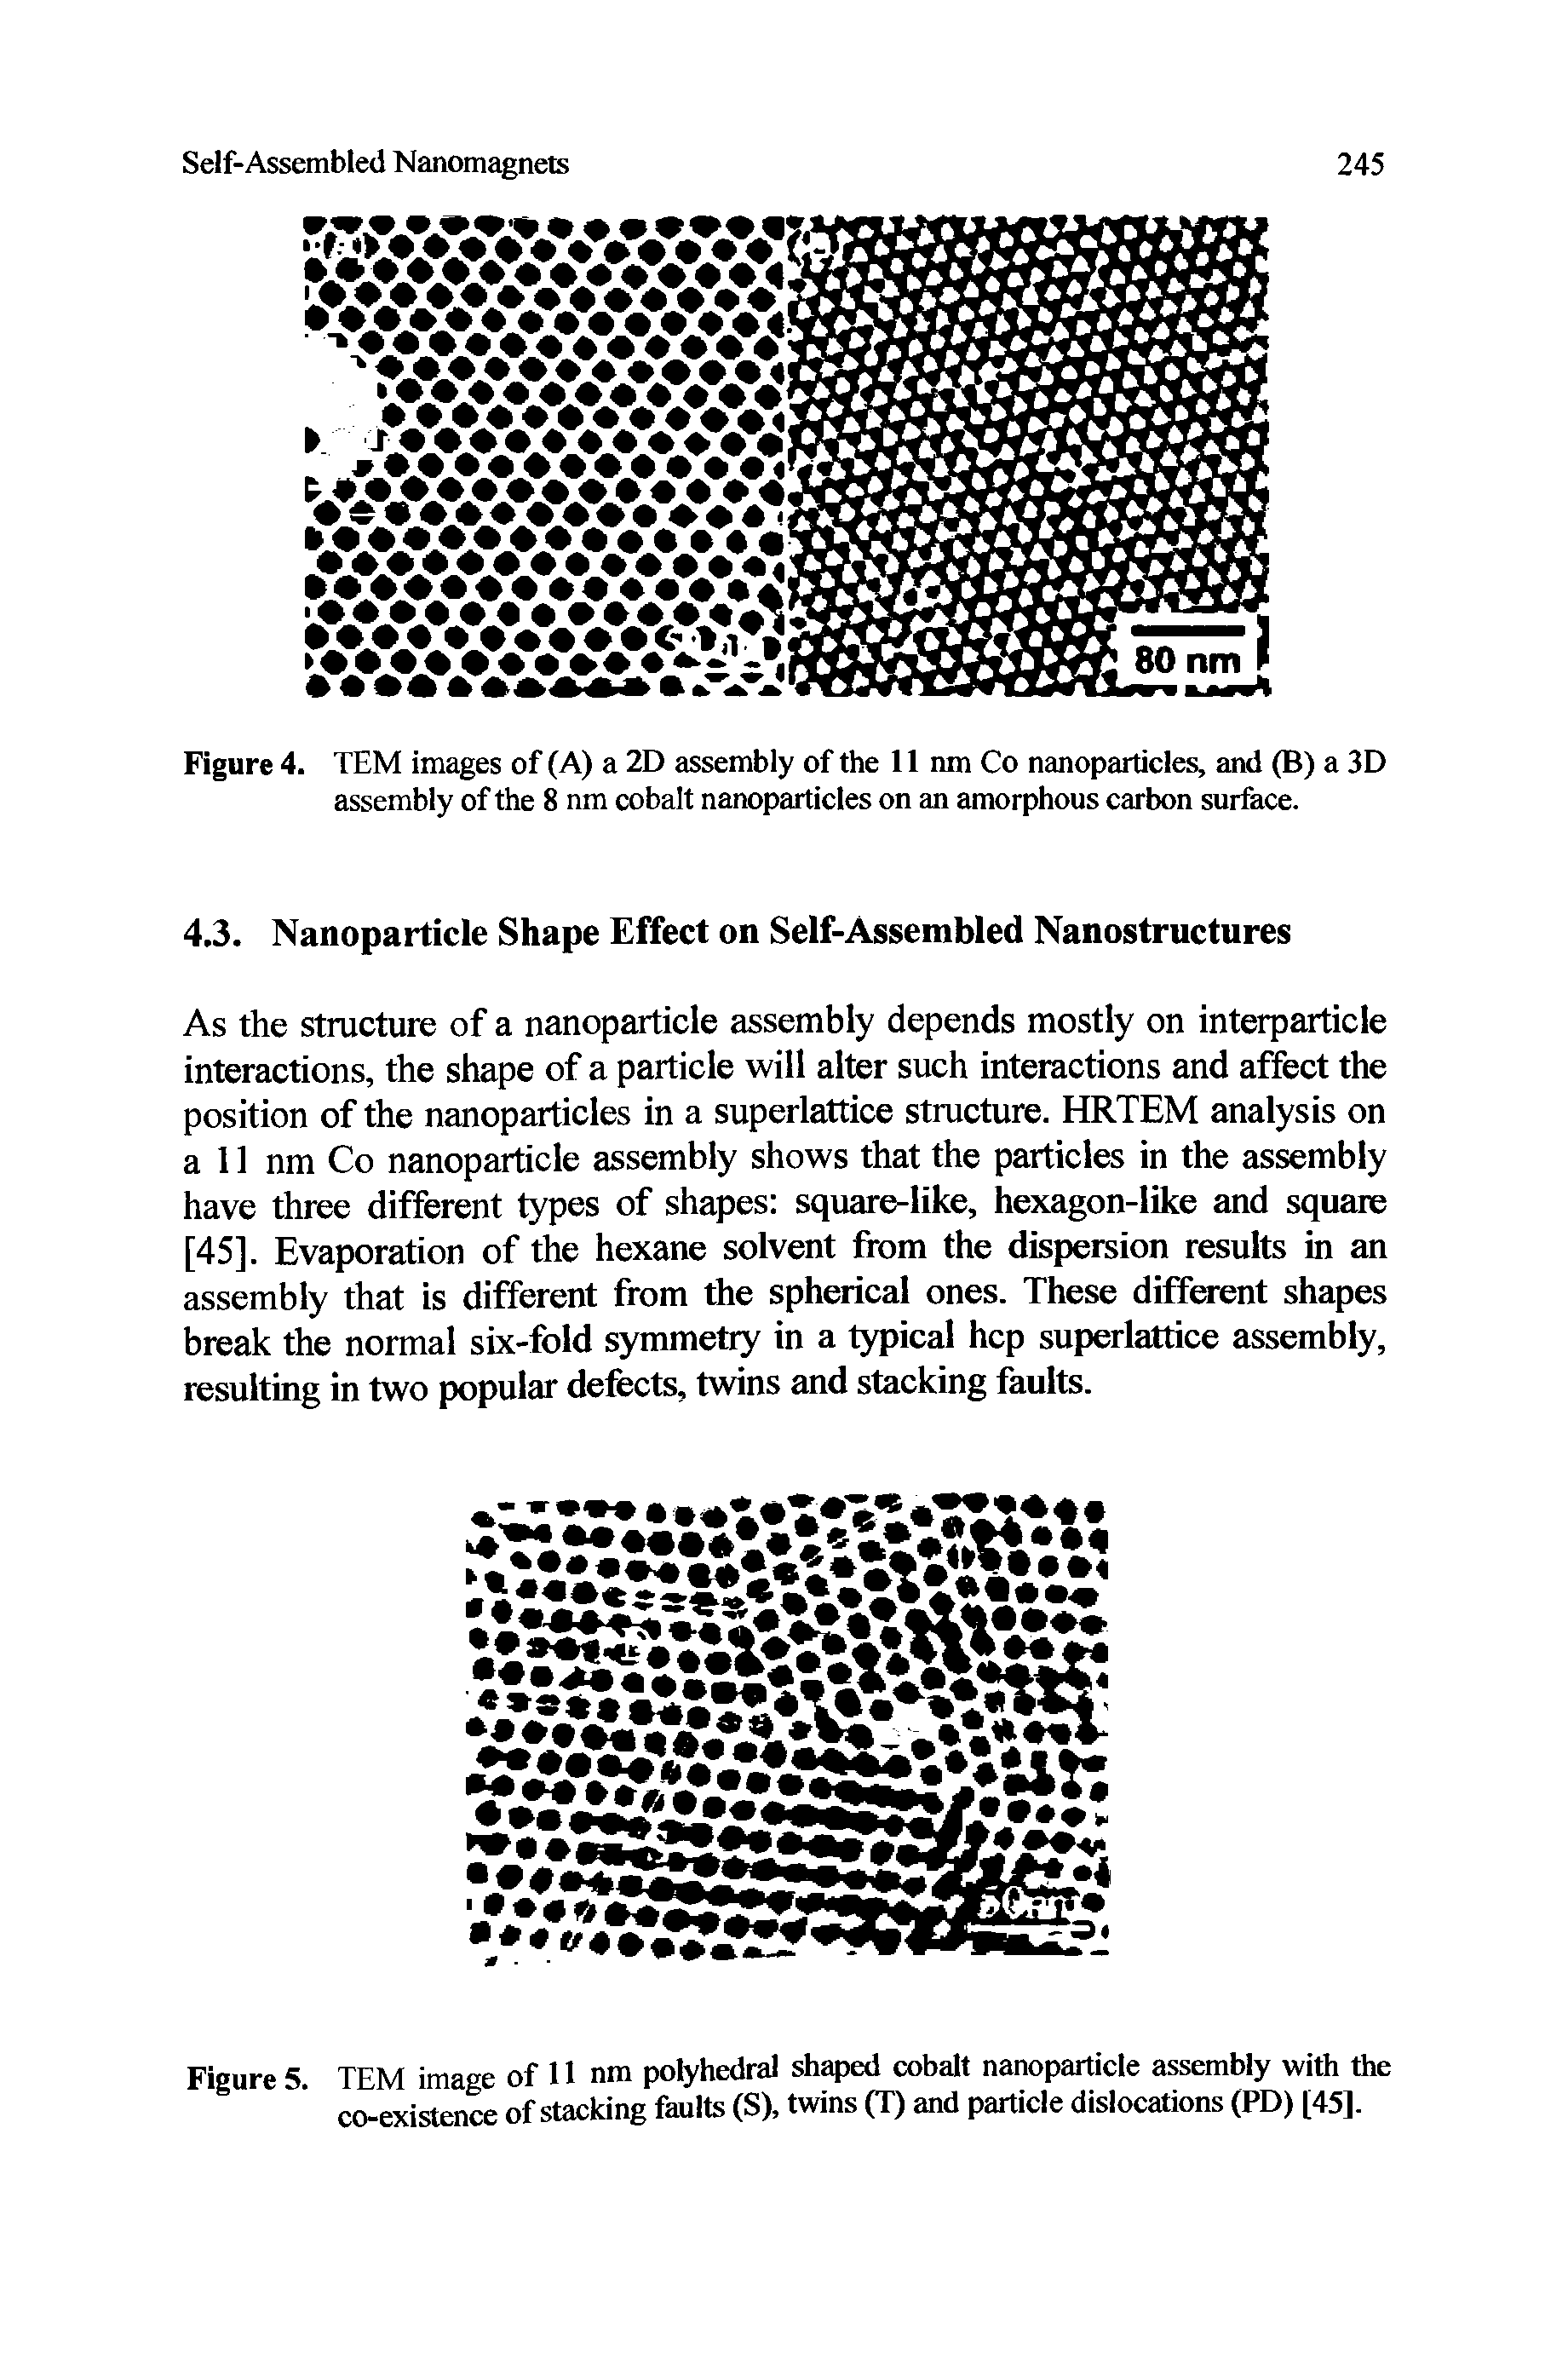 Figure 5. TEM image of 11 nm polyhedral shaped cobalt nanoparticle assembly with the co-existence of stacking faults (S), twins (T) and particle dislocations (PD) [45].